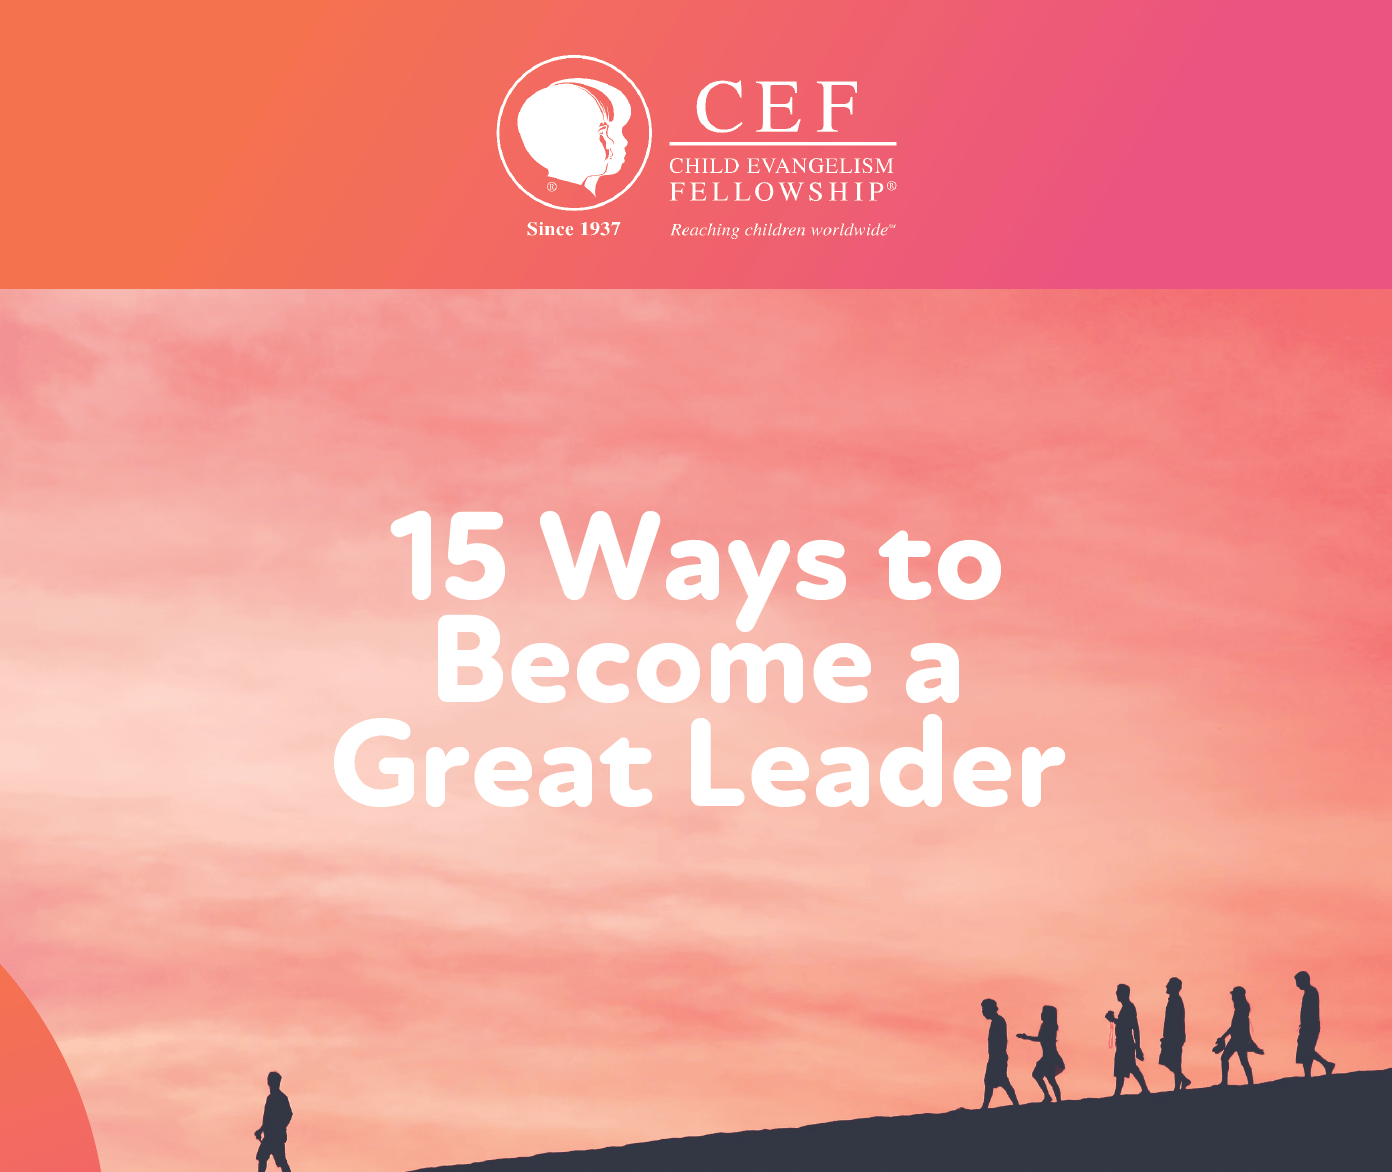 15 Ways to Become a Great Leader